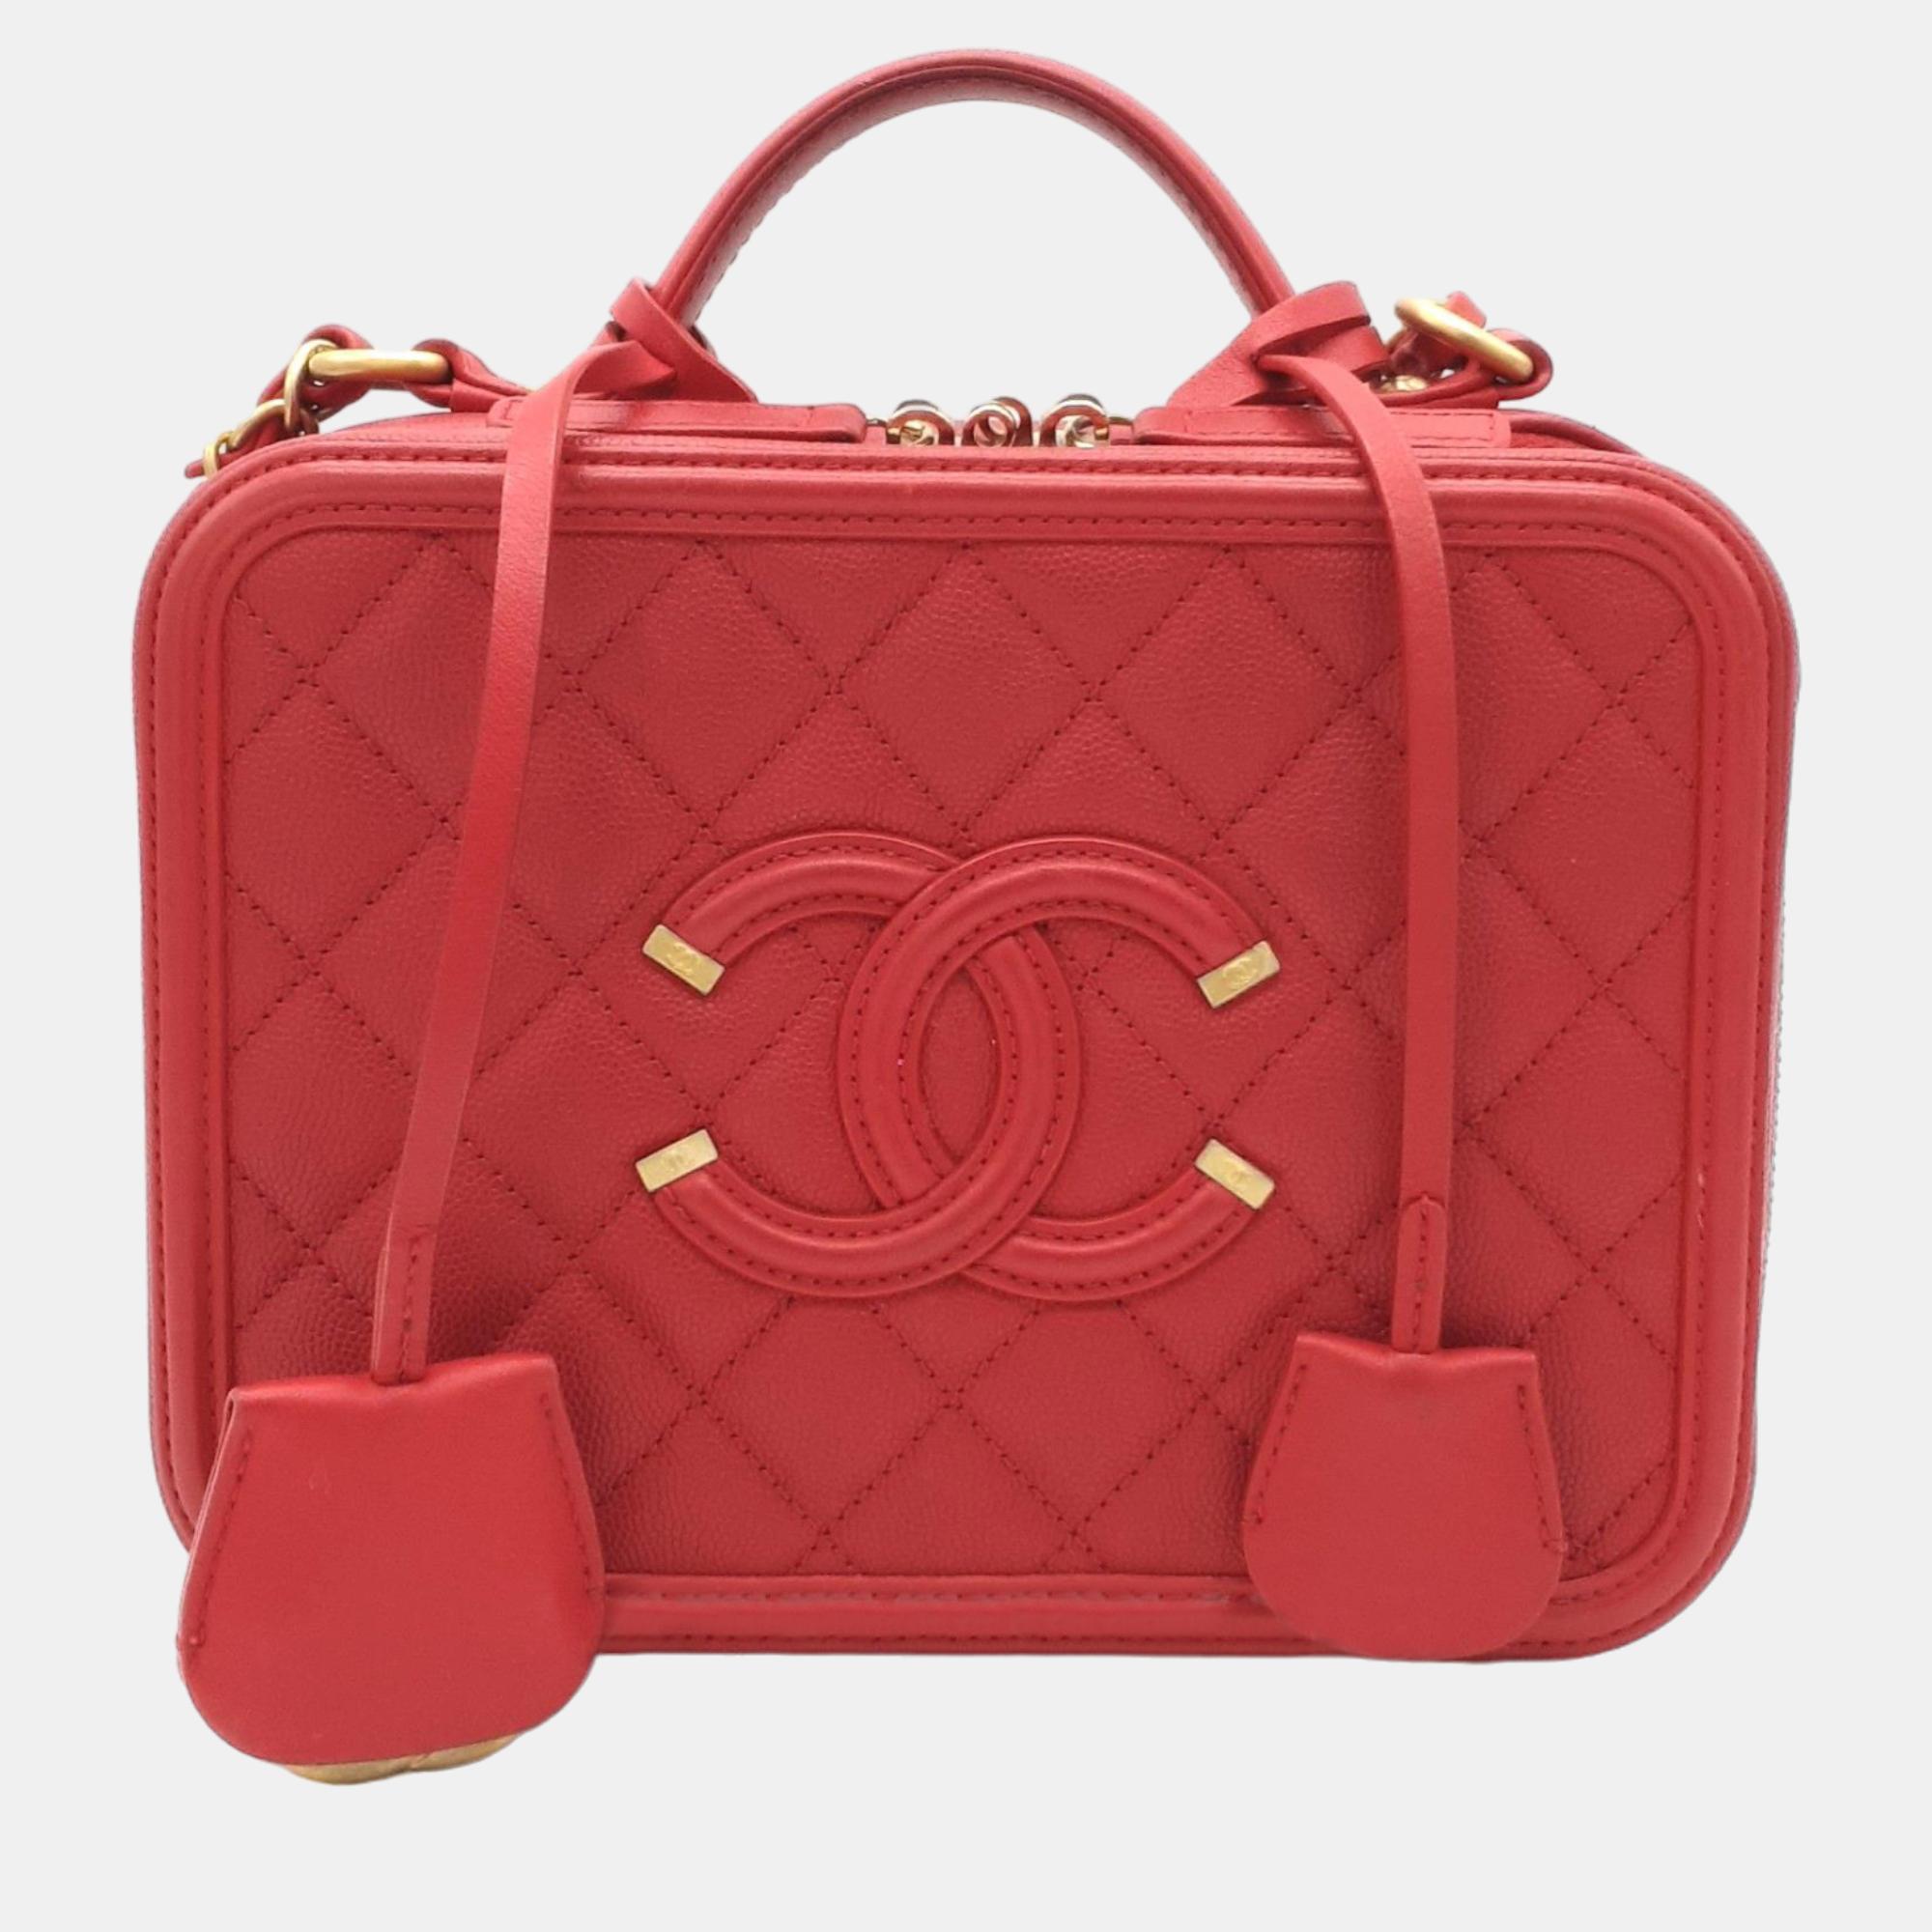 Chanel Red Leather CC Vanity Case